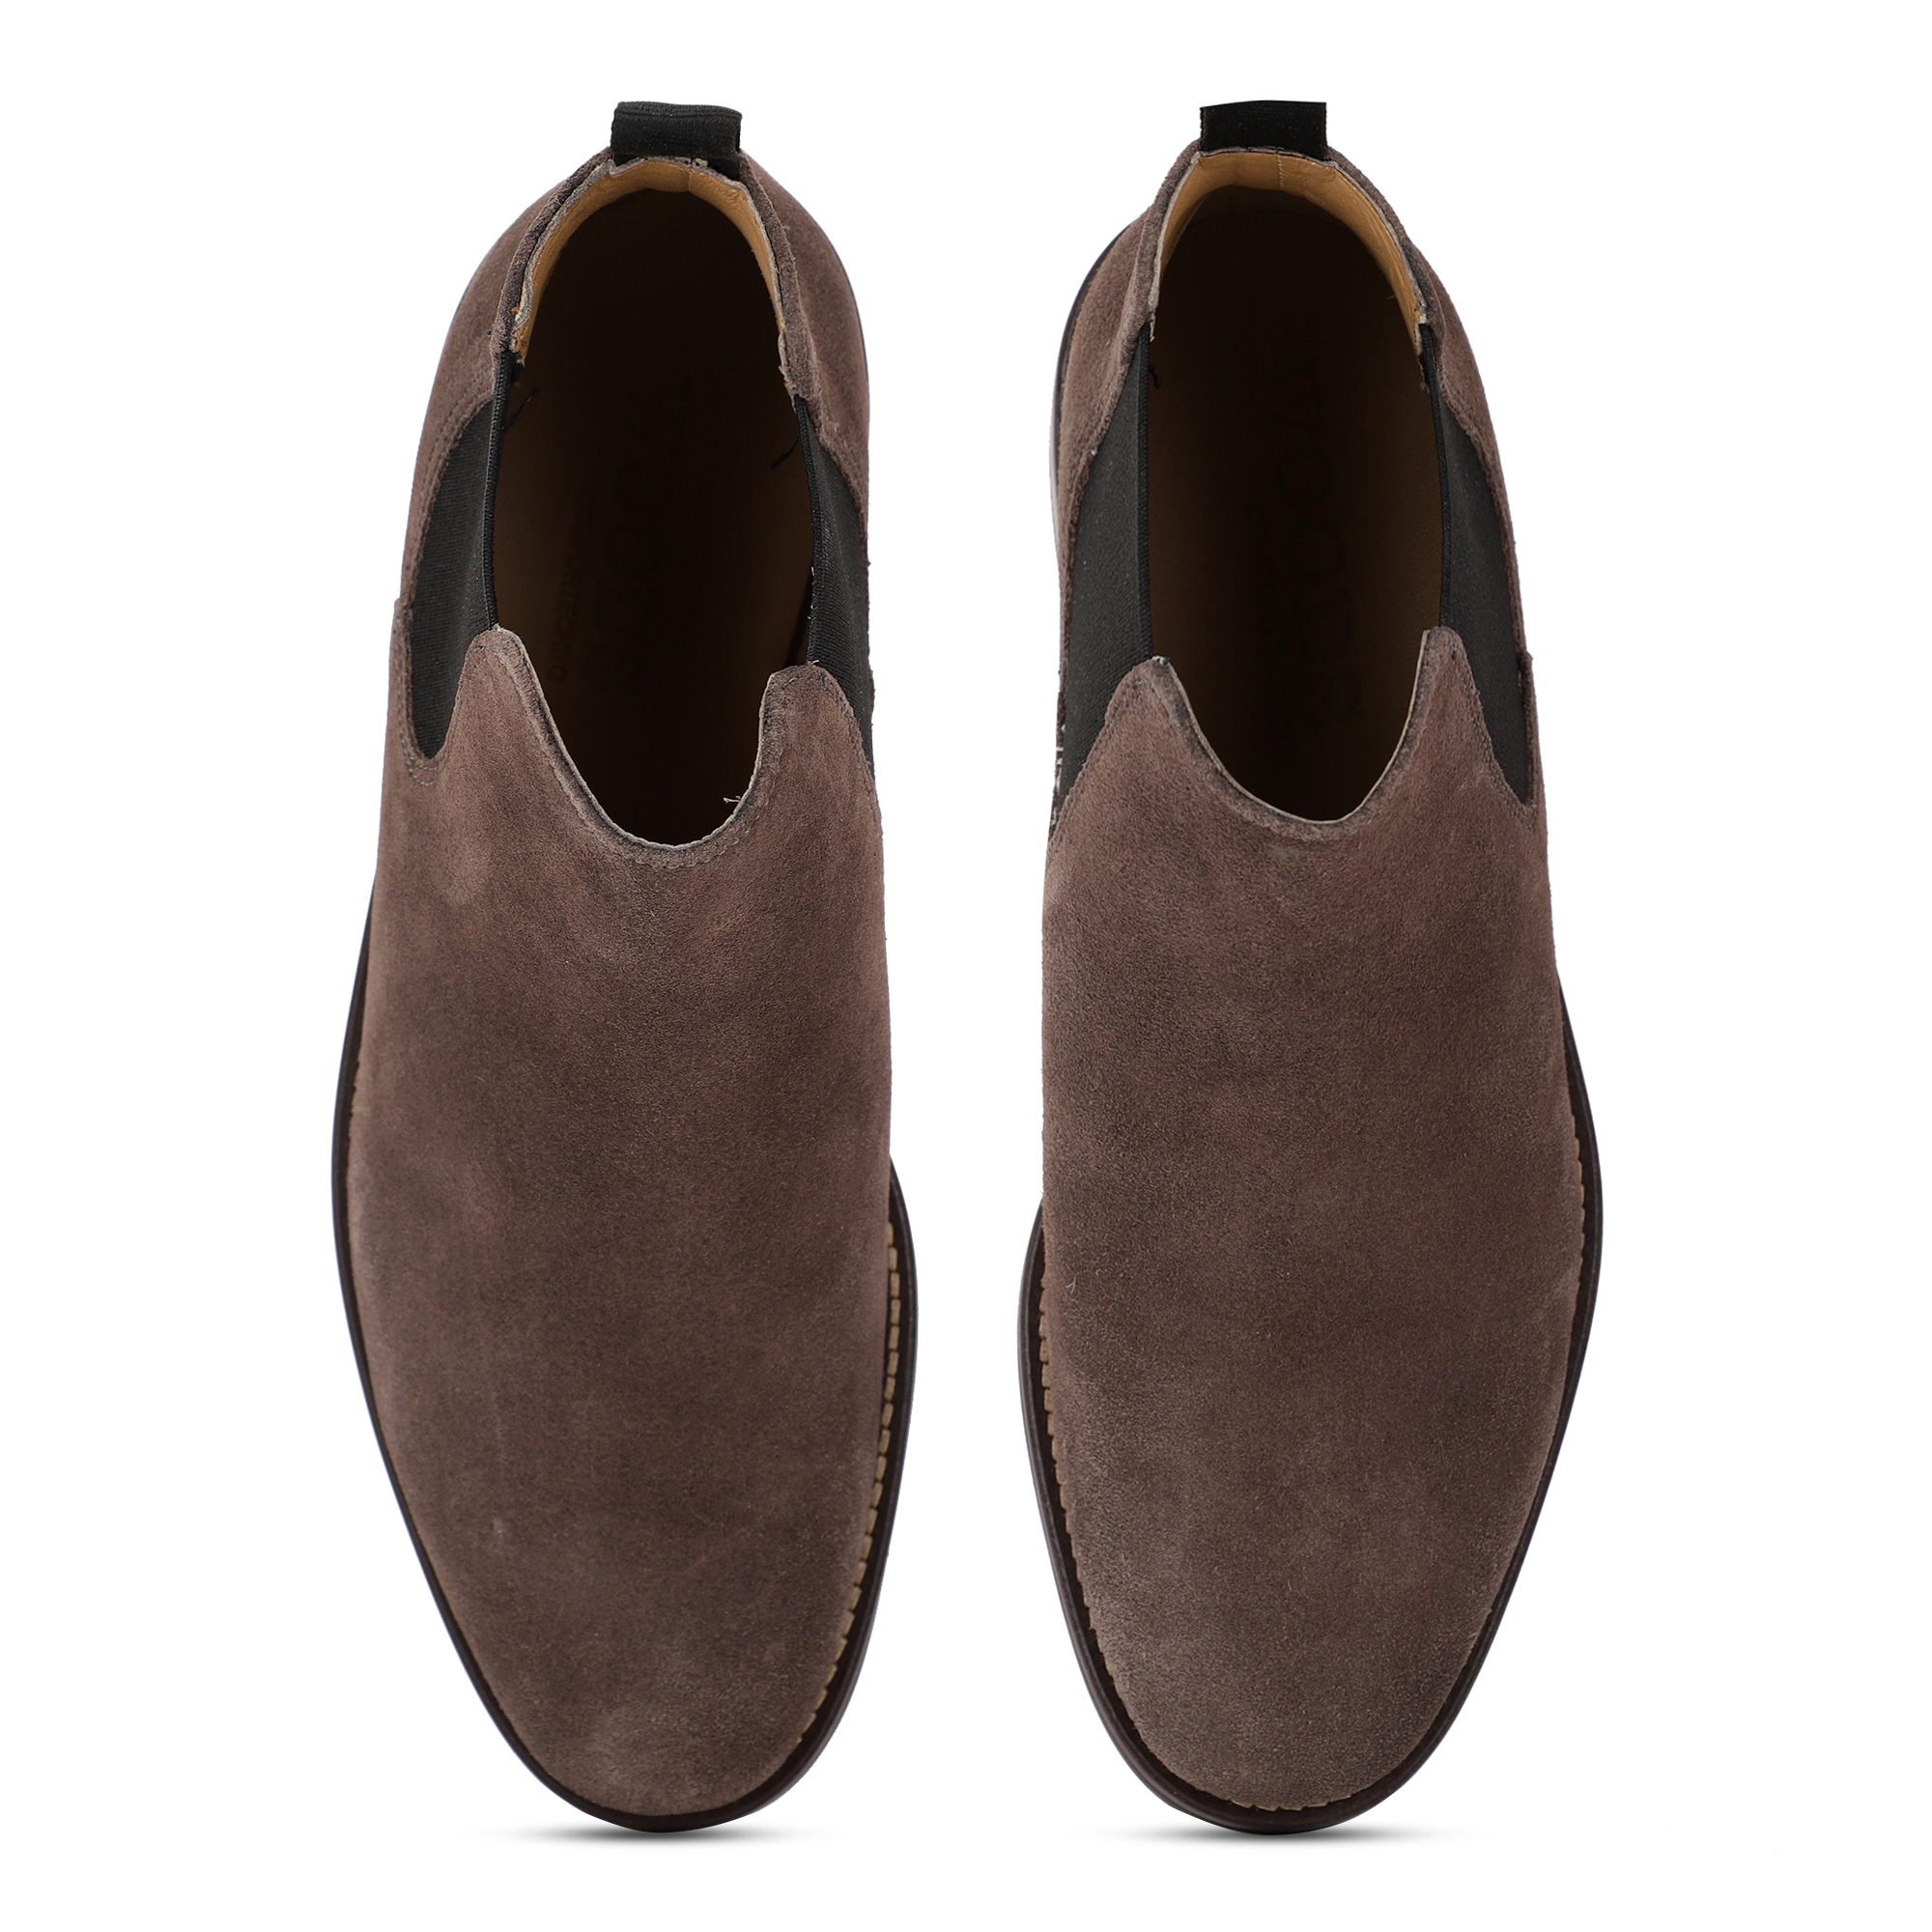 Chiku/Toupe Chelsea Boots for Men